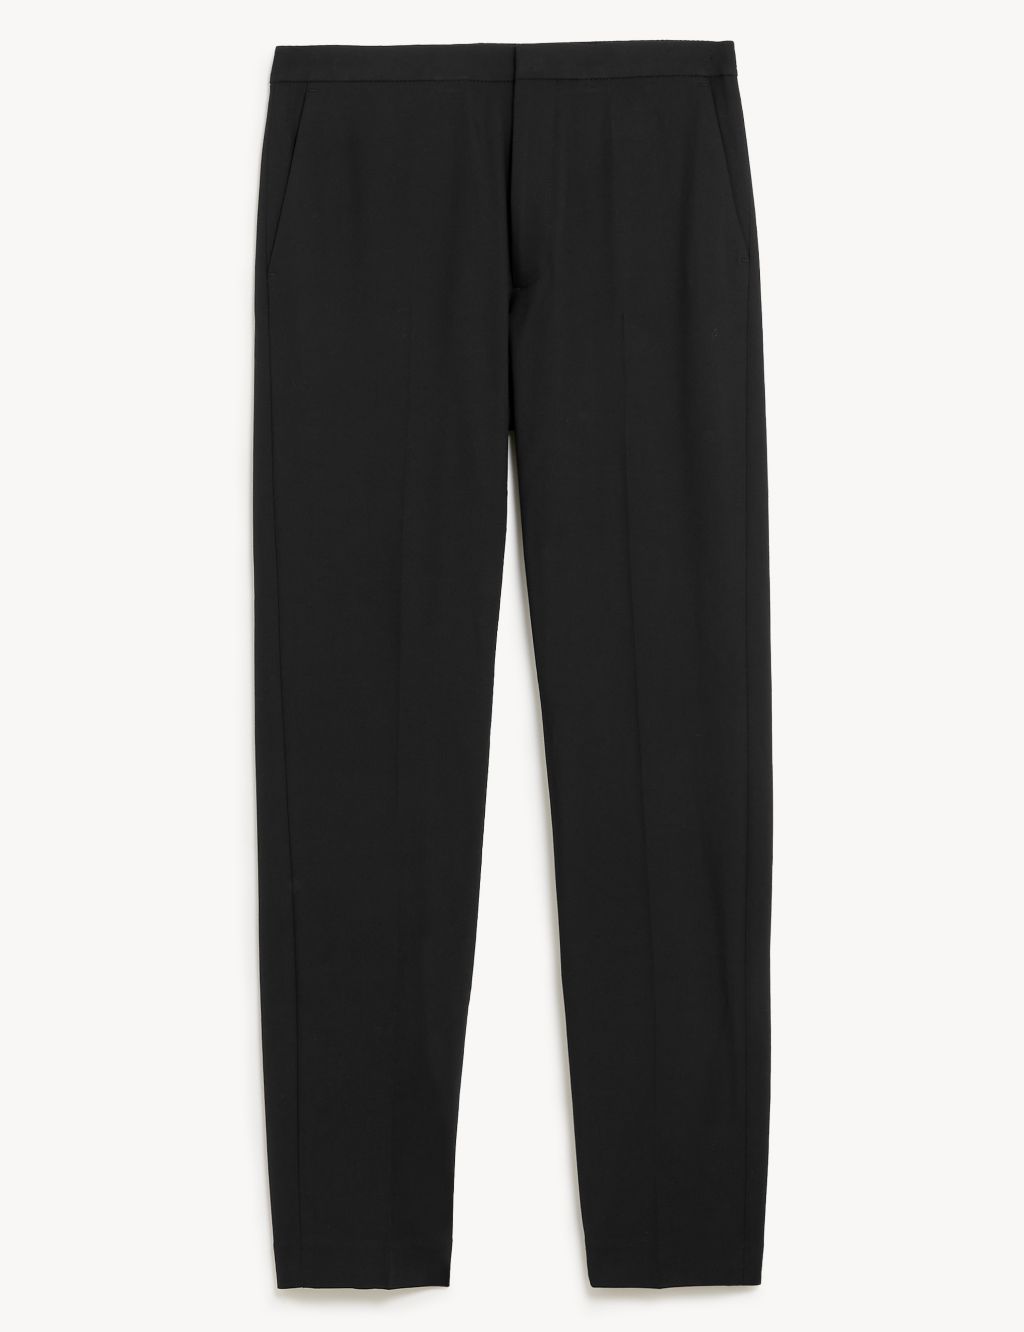 Textured 360 Flex Trousers image 6